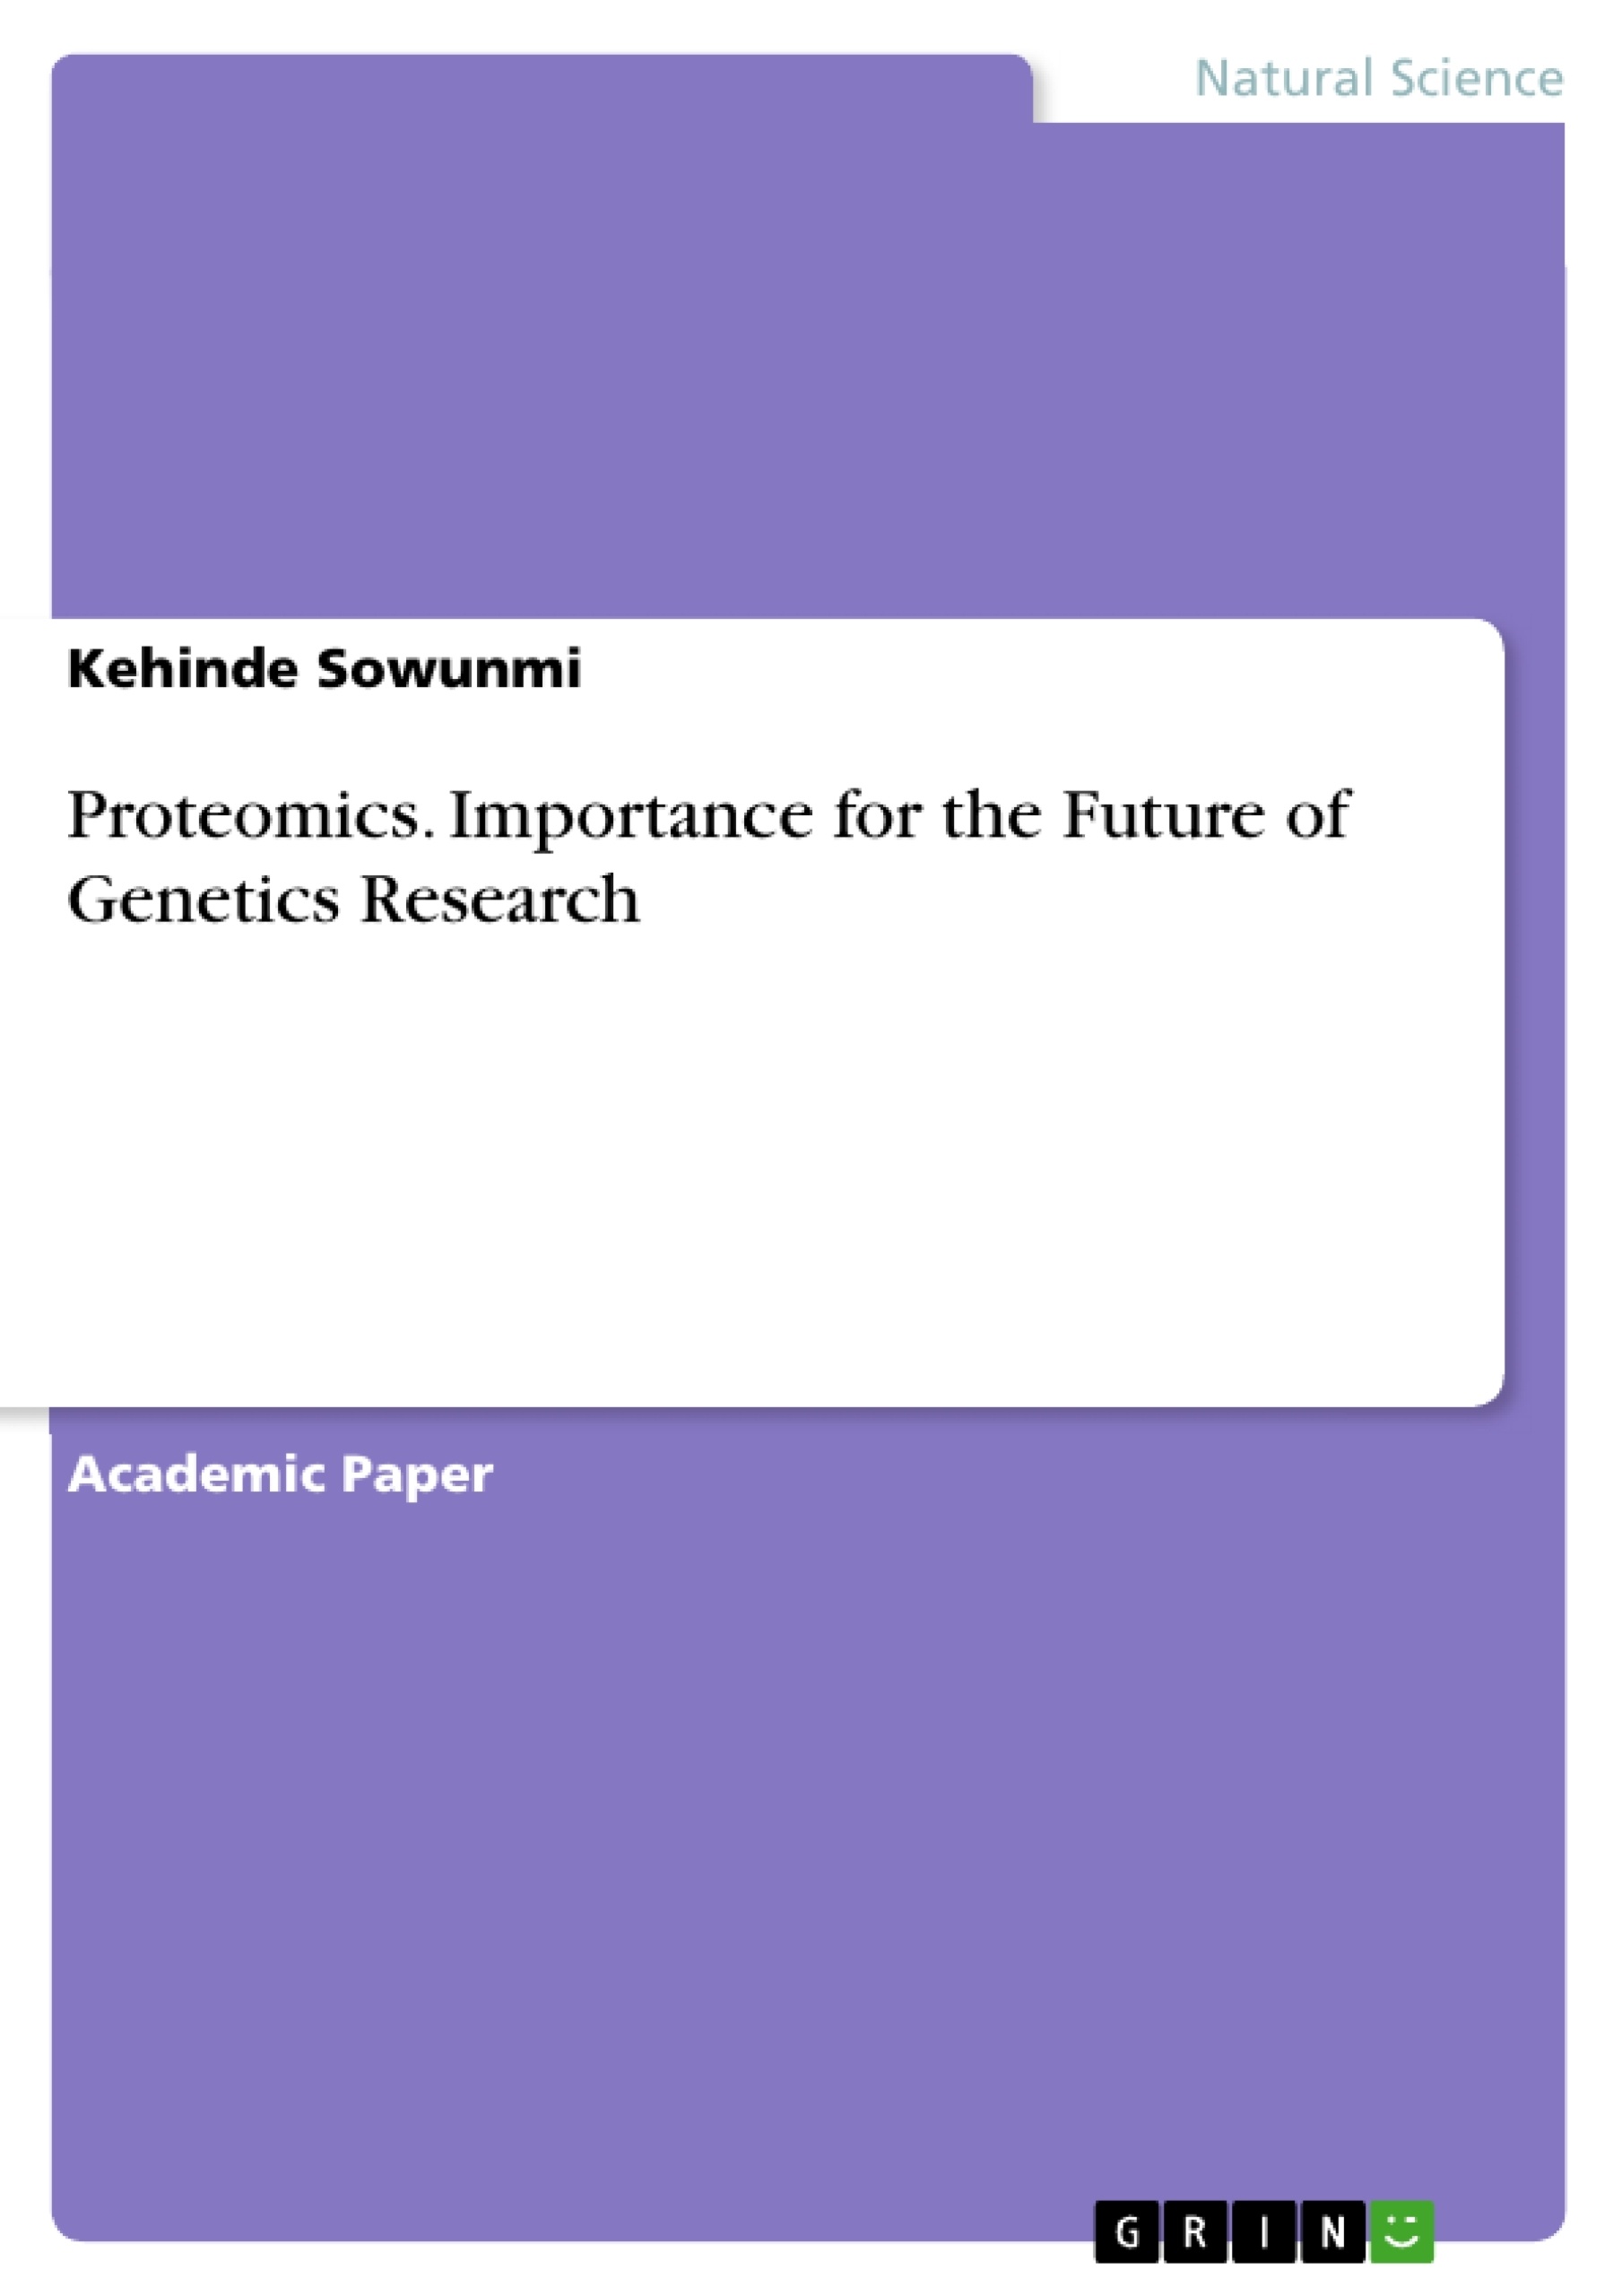 Titre: Proteomics. Importance for the Future of Genetics Research